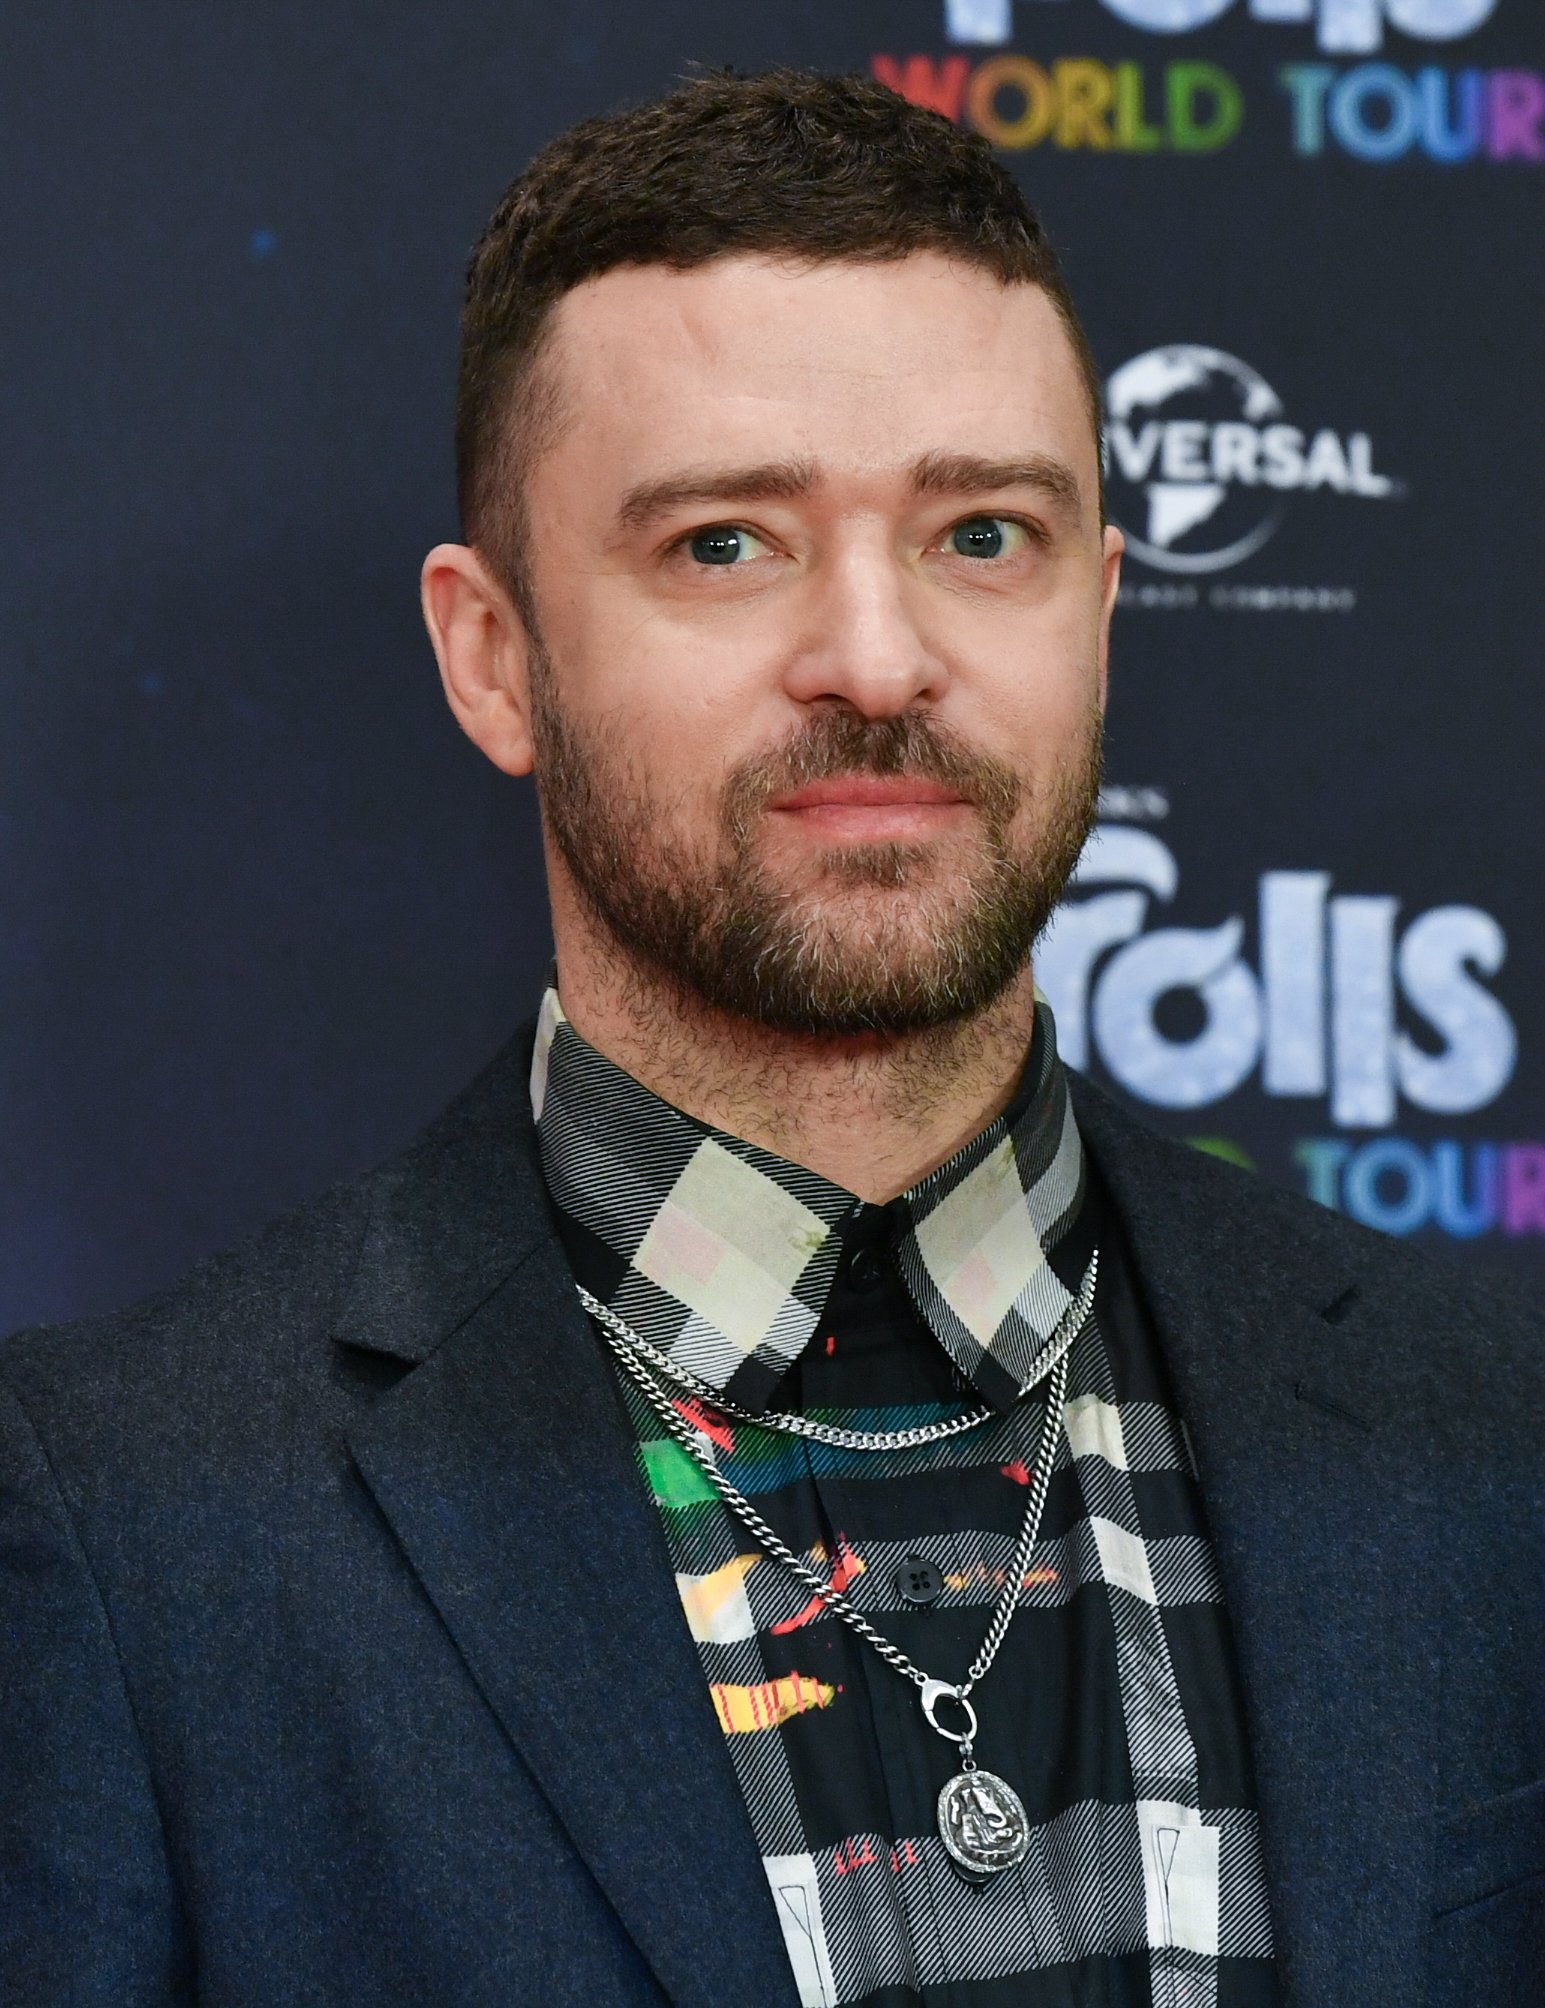 Justin Timberlake posing at the Waldorf Historia for the film "Trolls World Tour" on 17 February 2020, Berlin. | Source: Getty Images